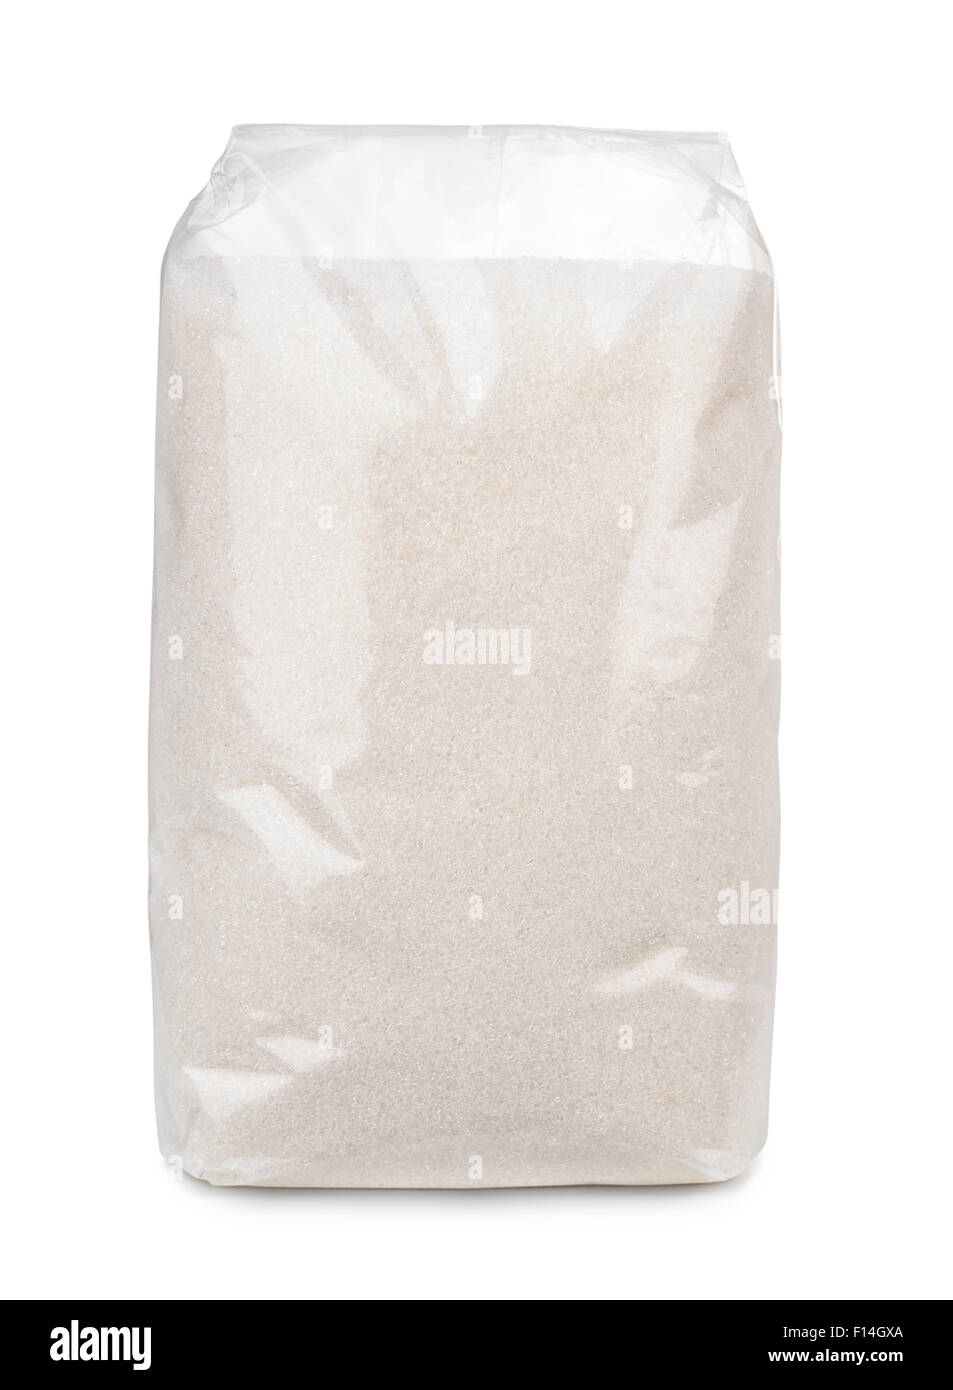 Transparent plastic bag of sugar isolated on white Stock Photo